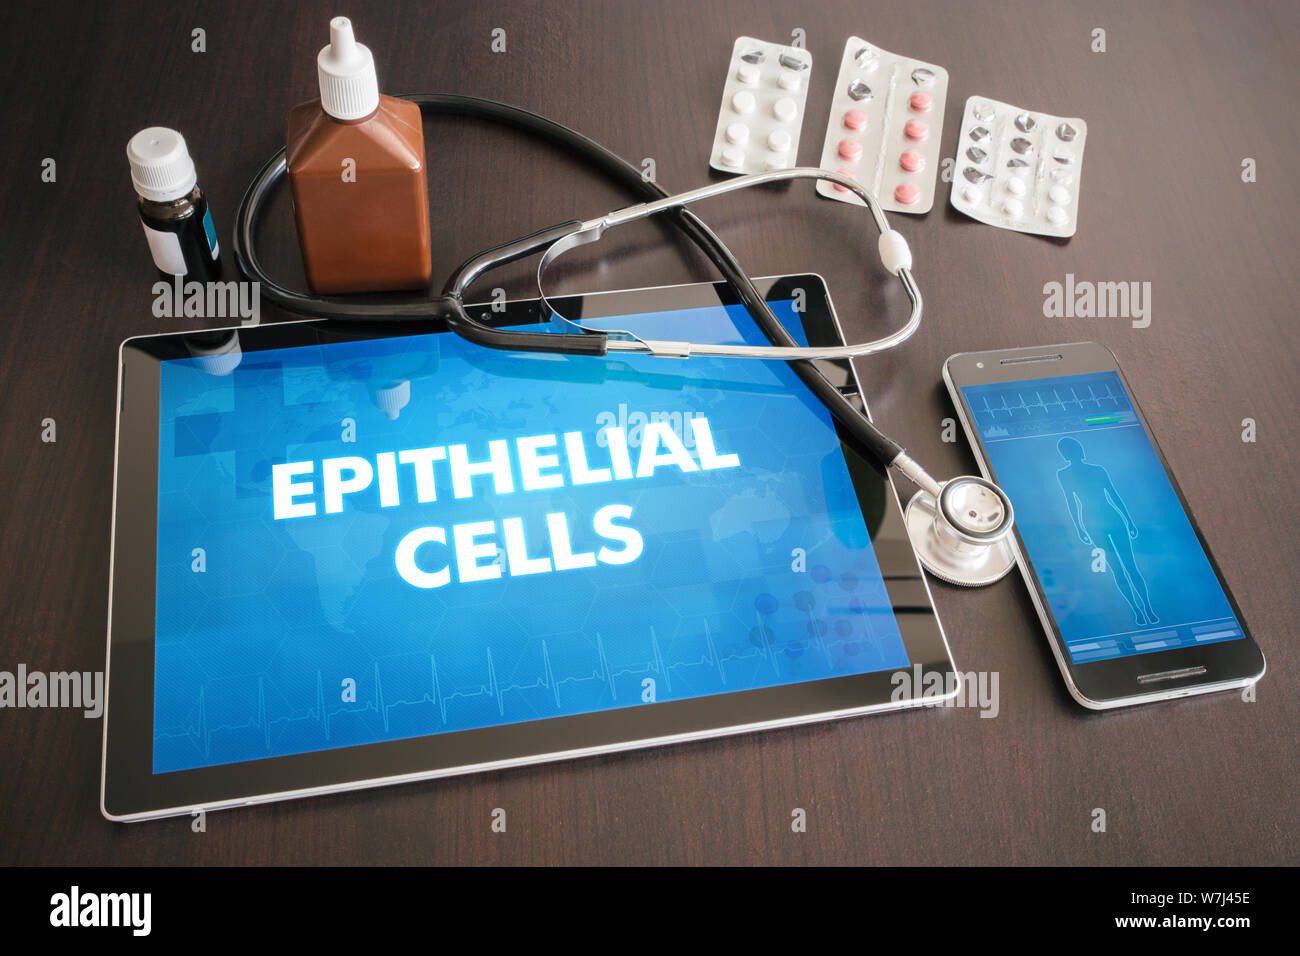 Epithelial cells (cancer related) diagnosis medical concept on tablet screen with stethoscope. Stock Photo